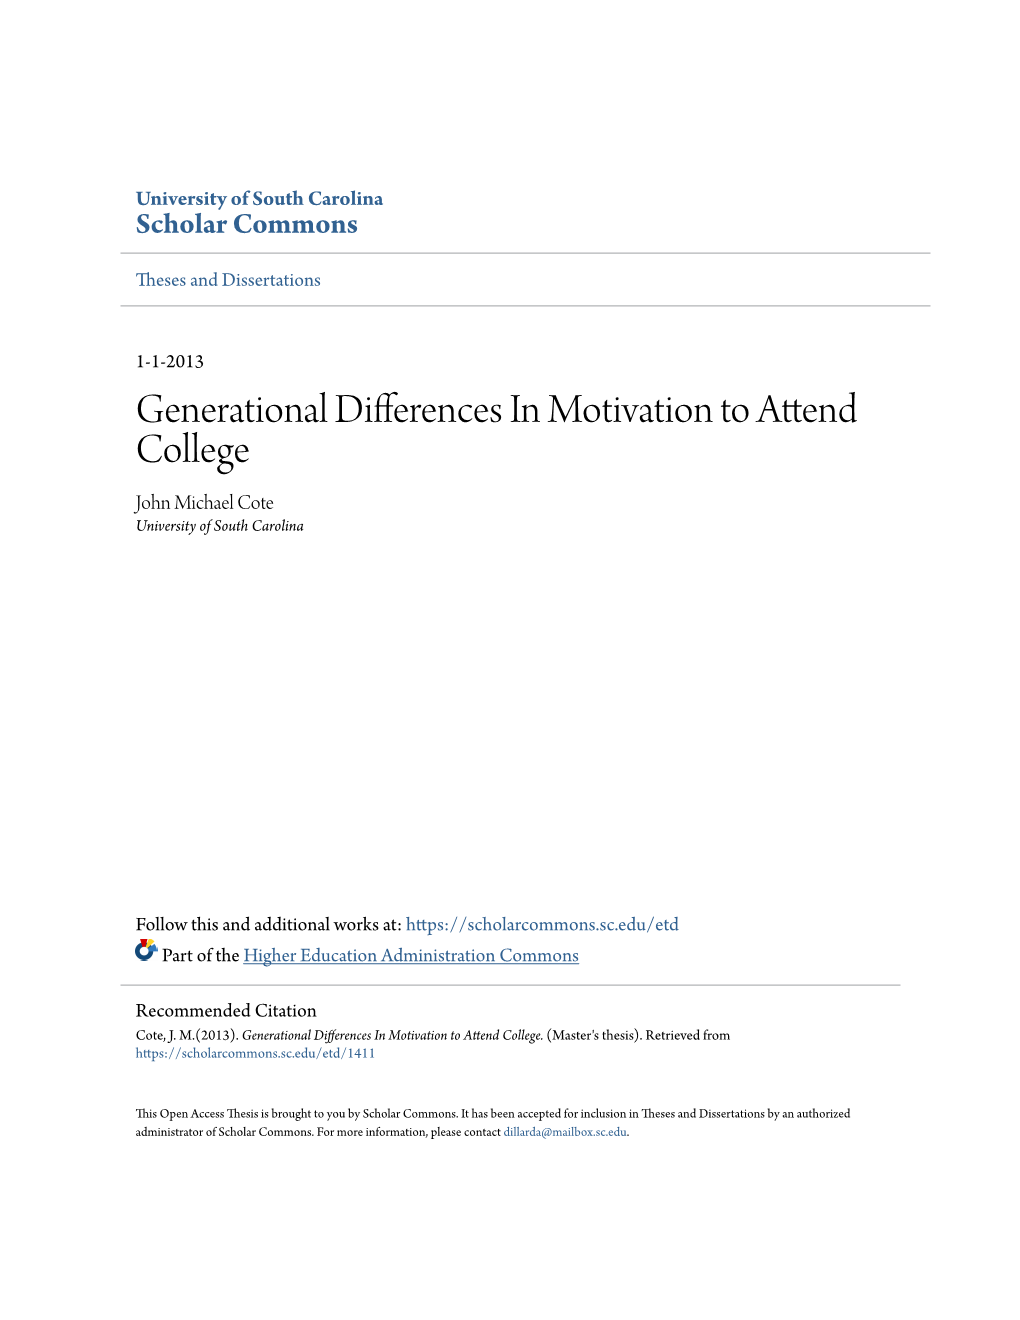 Generational Differences in Motivation to Attend College John Michael Cote University of South Carolina